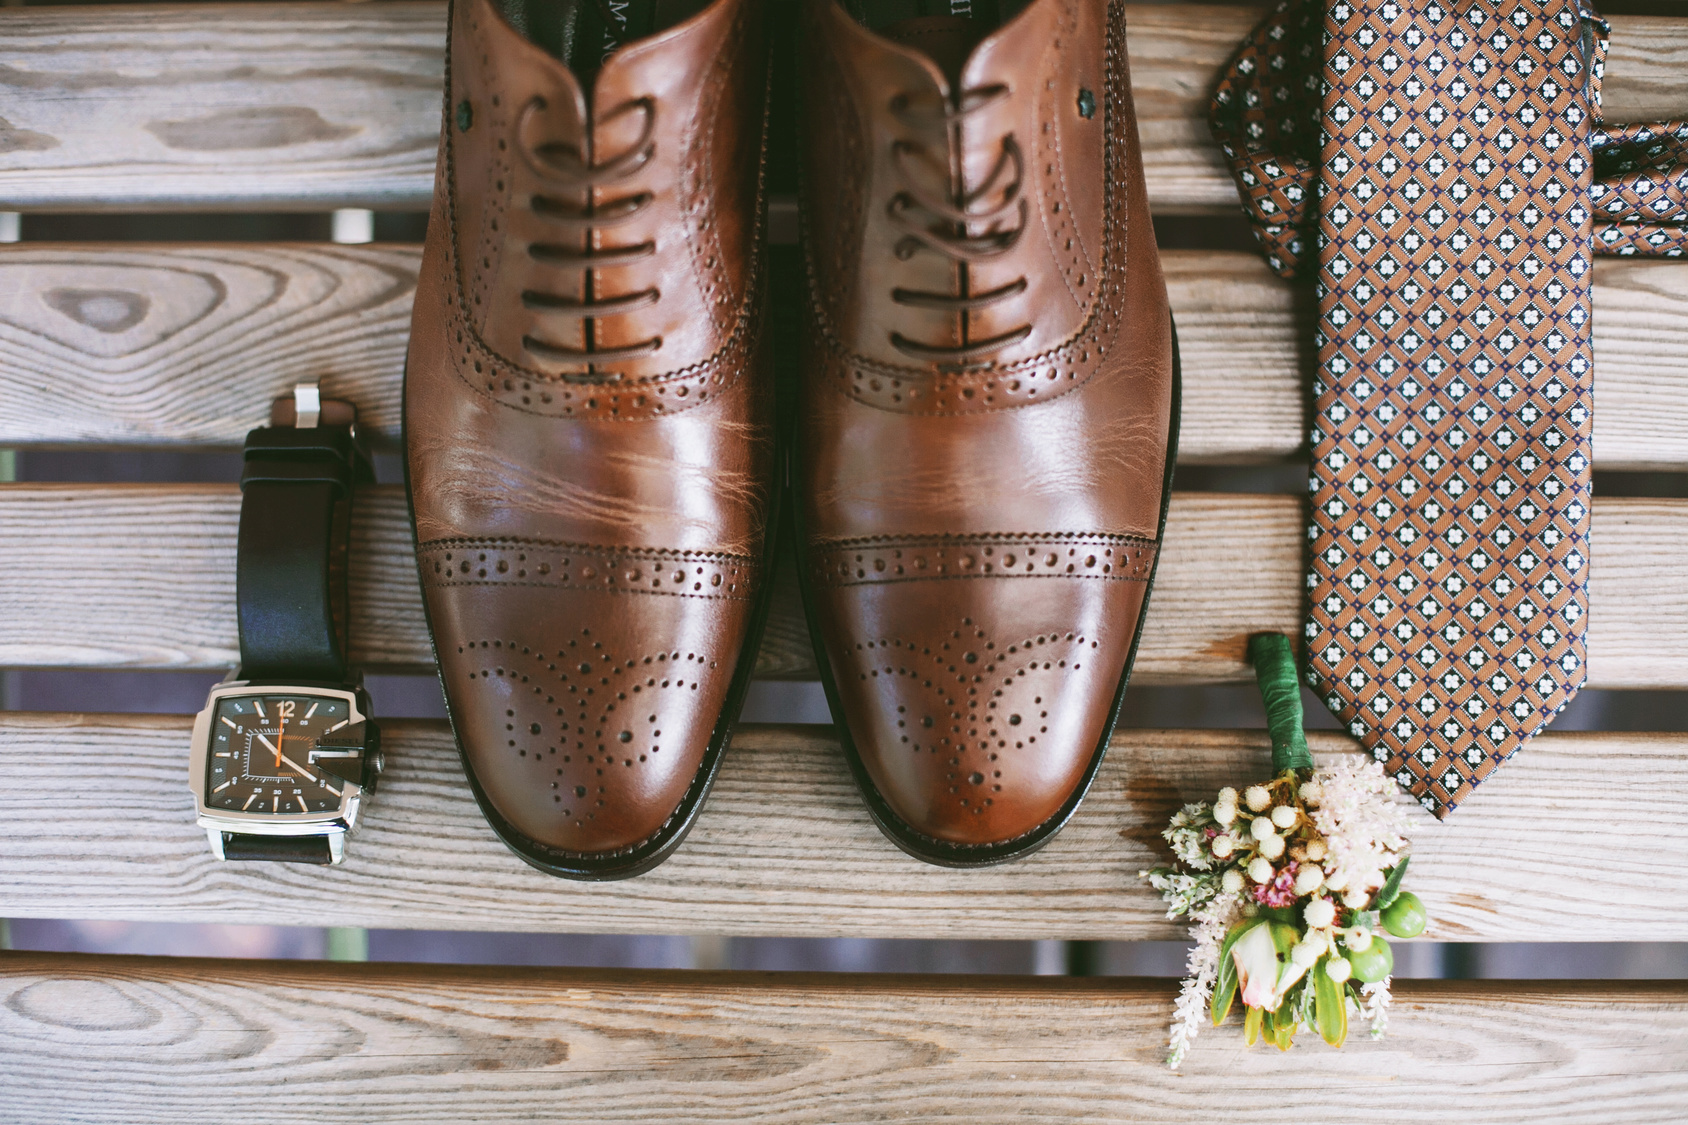 How to Buy Comfortable Wedding Shoes